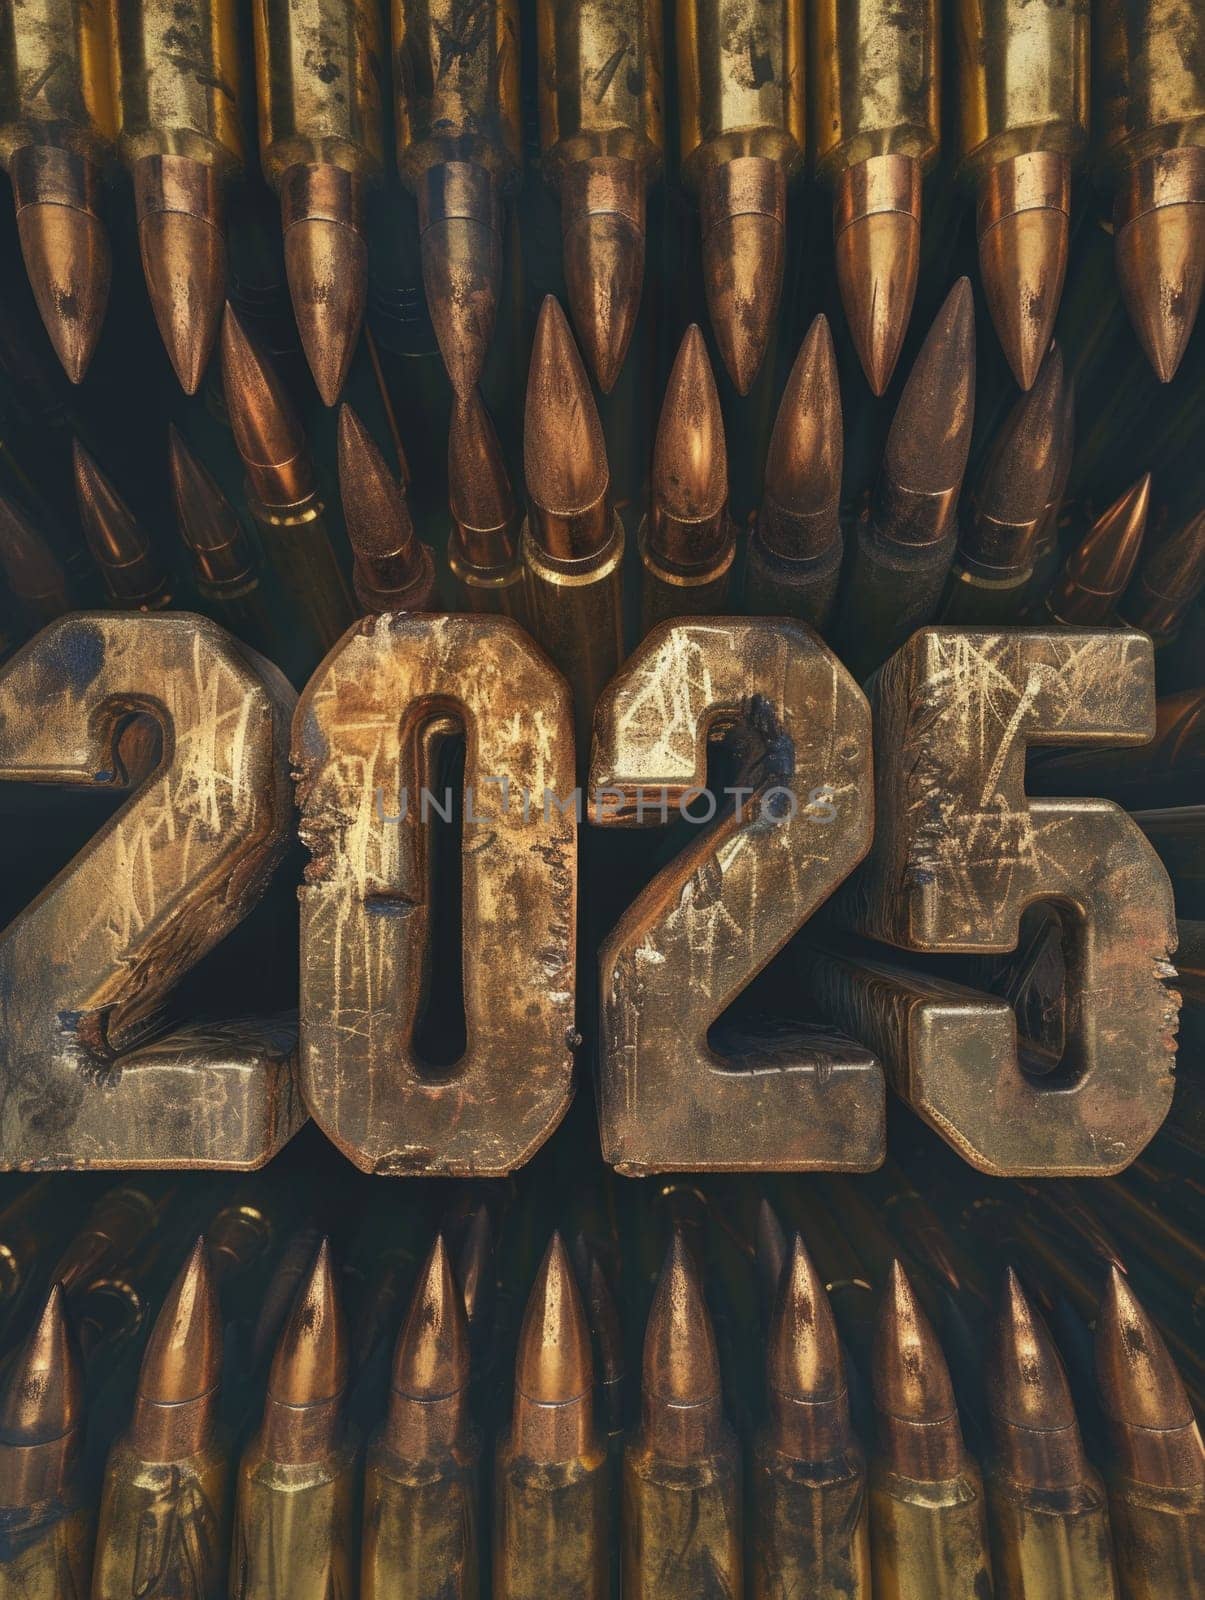 A detailed view of multiple bullet casings, showcasing their unique markings and textures.